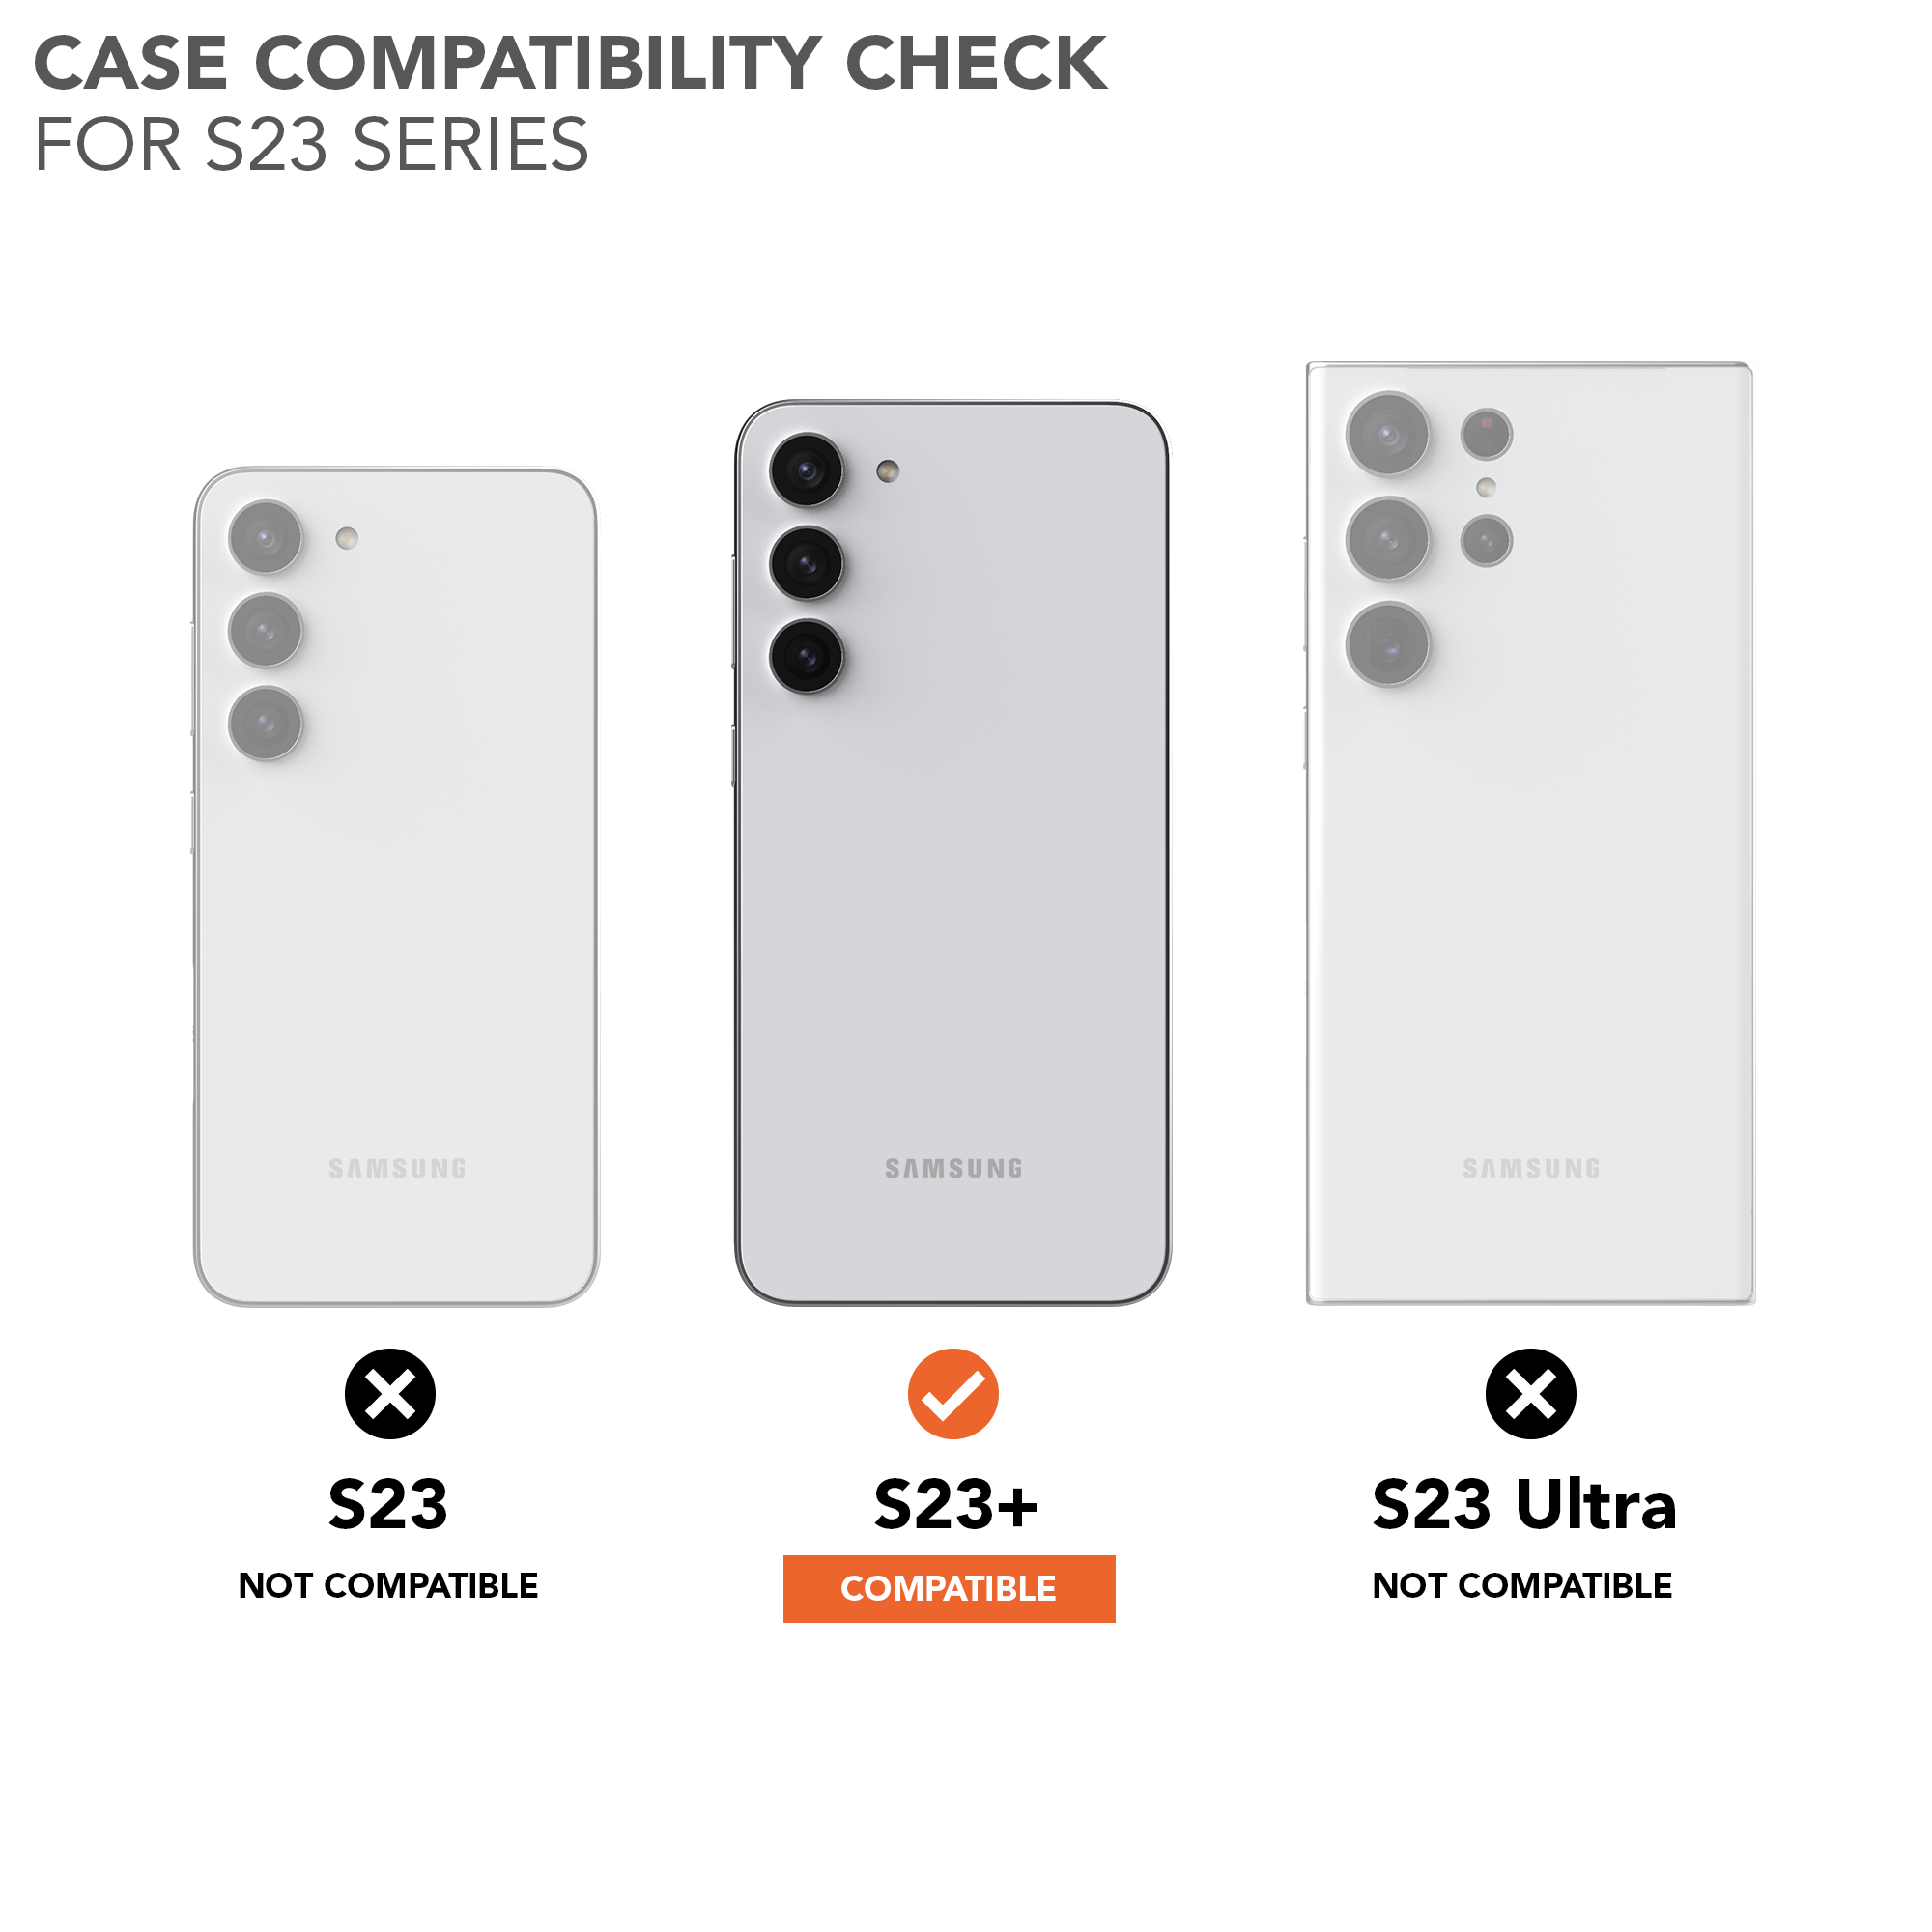 Rokform Rugged Case Compatibility Chart for Samsung Galaxy S23S23